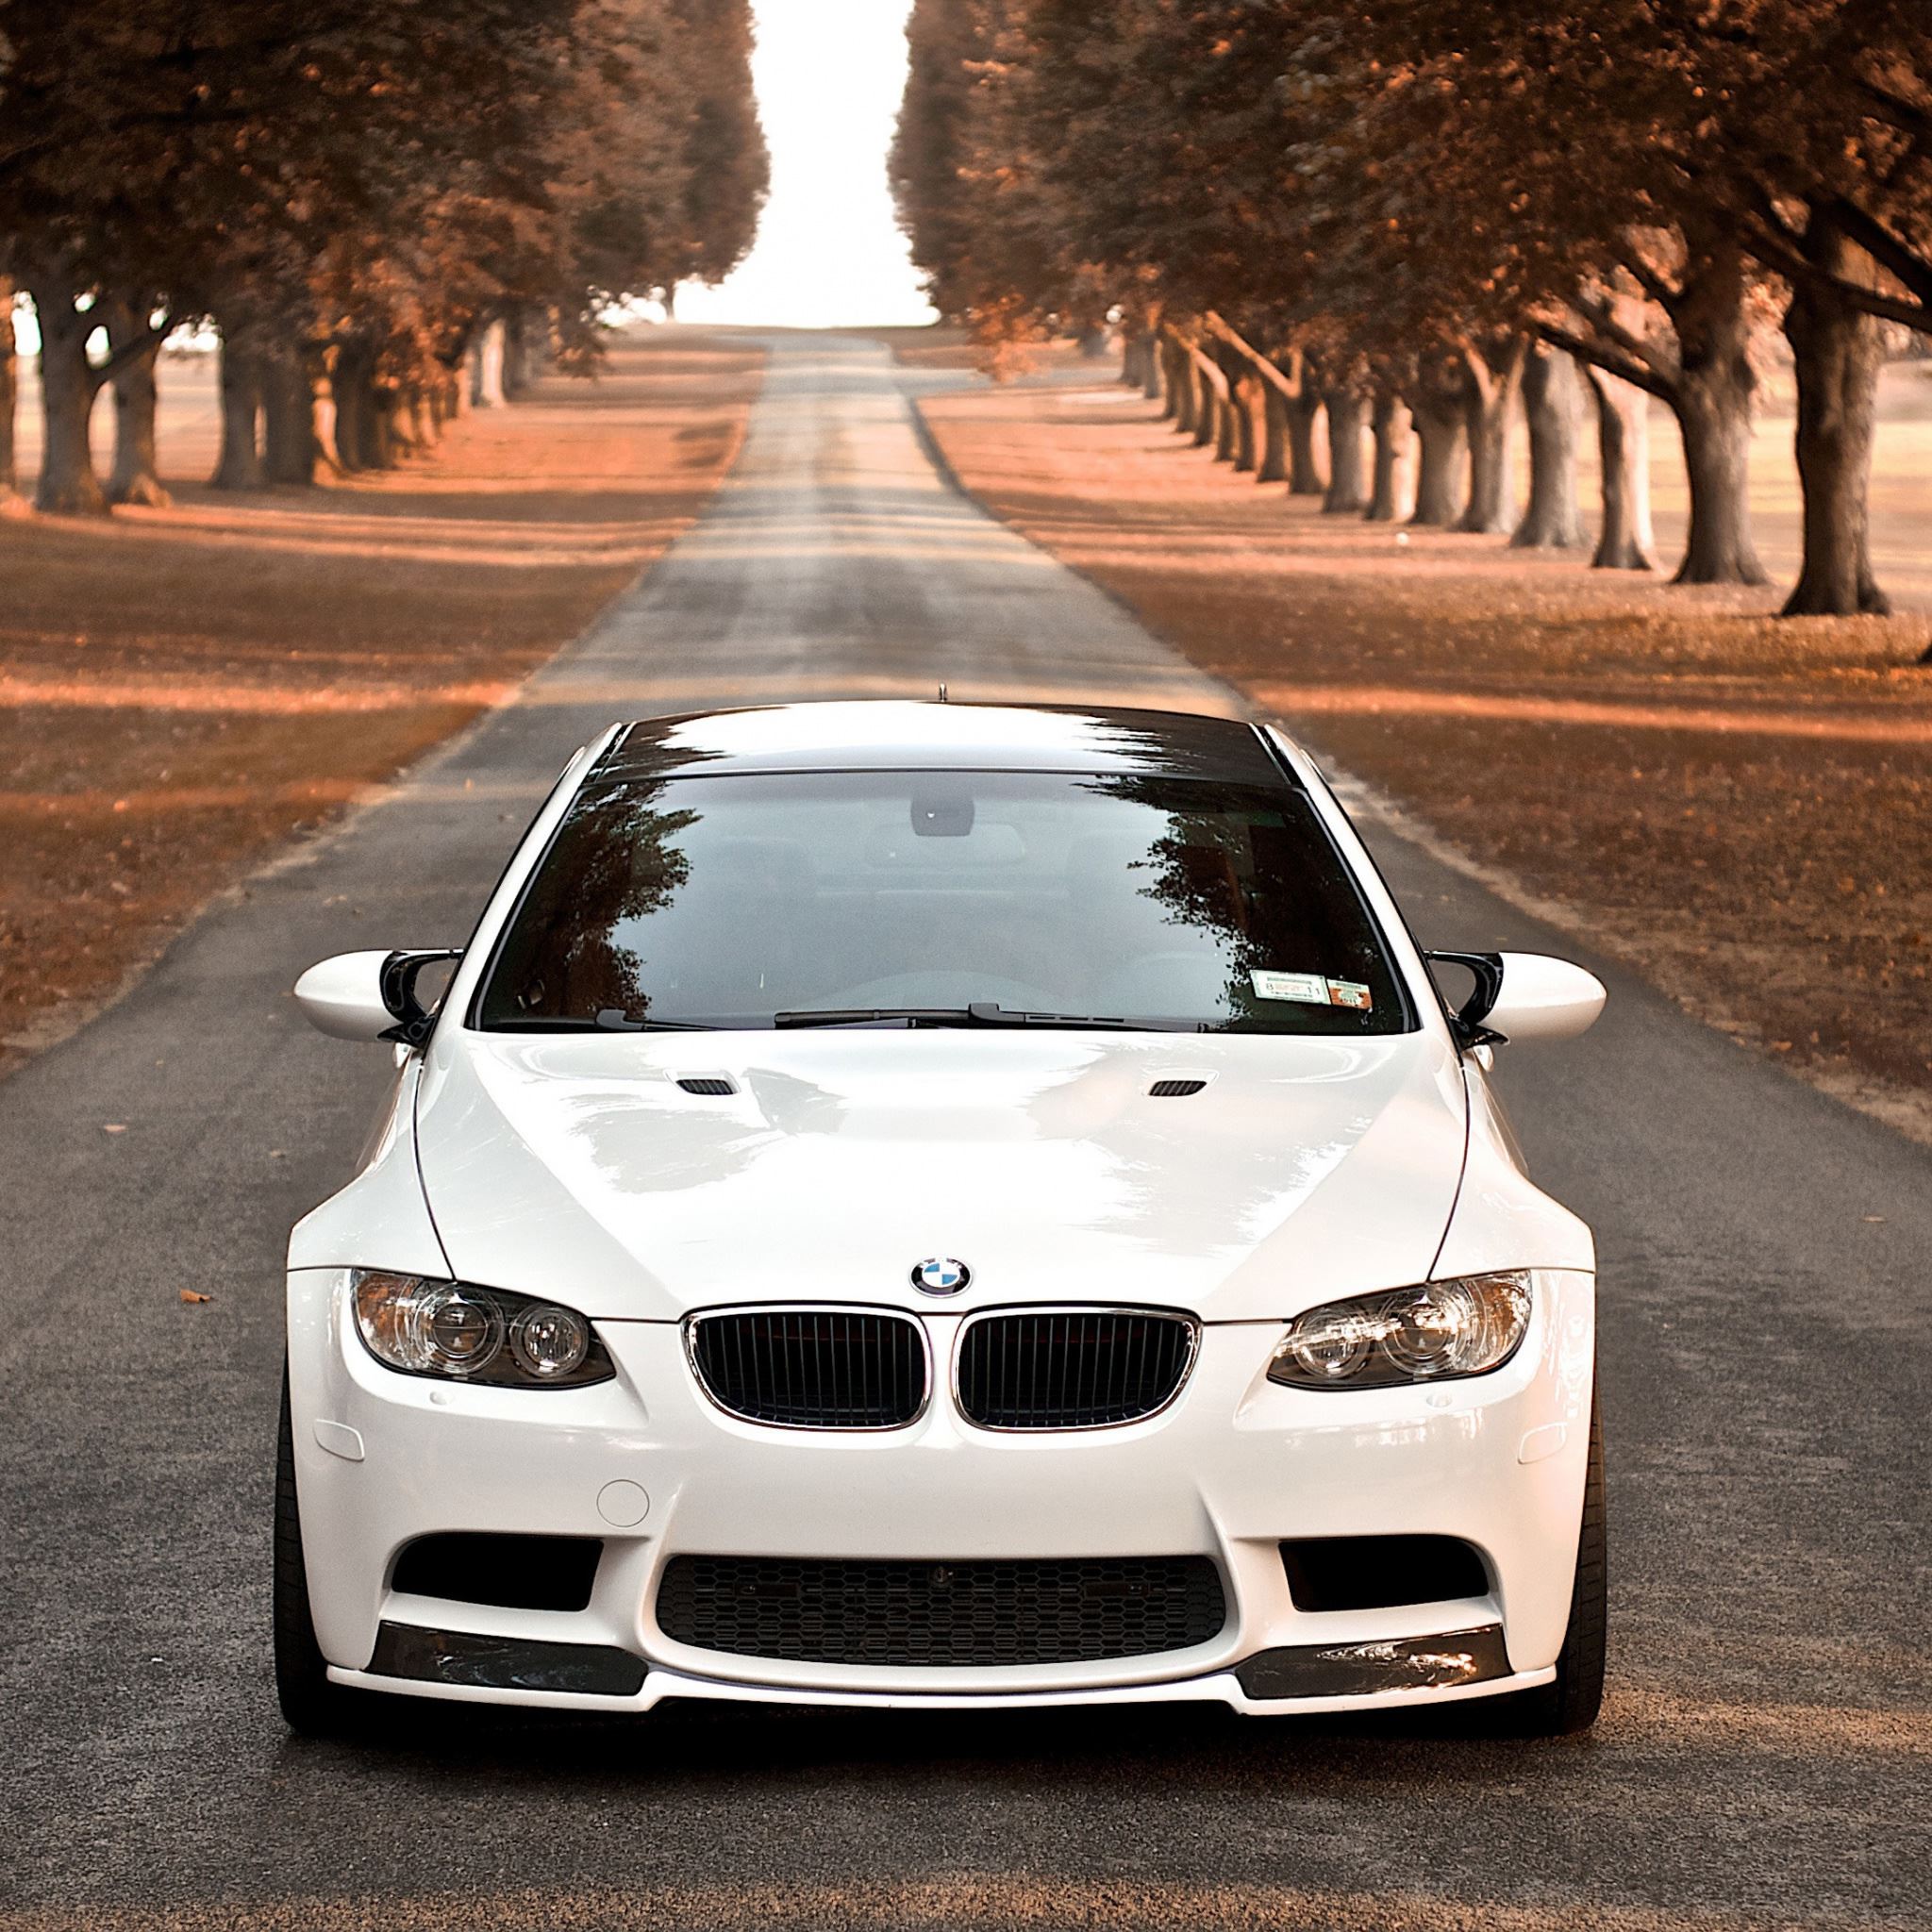 Bmw M3 Fall Ipad Air Wallpapers Free Download